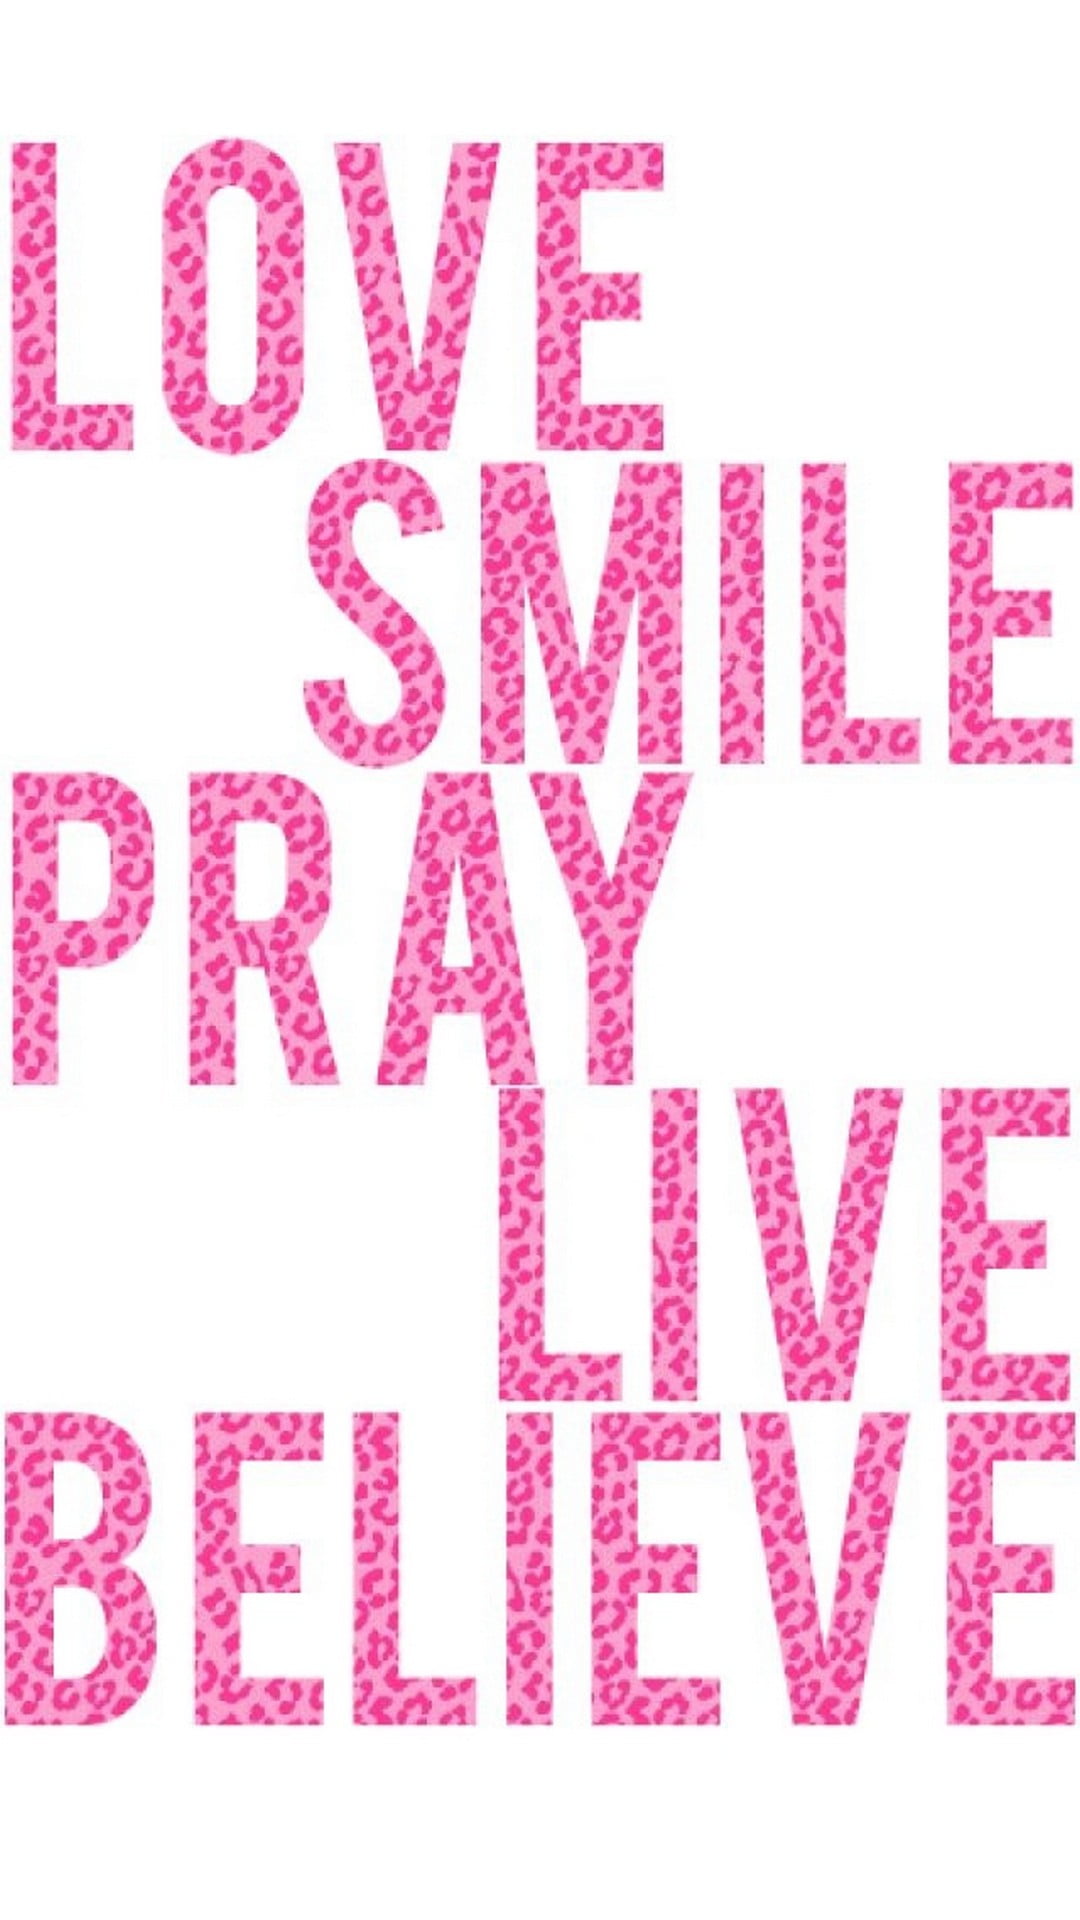 Love Smile Pray Live Believe Girly Wallpaper Iphone Wallpapers